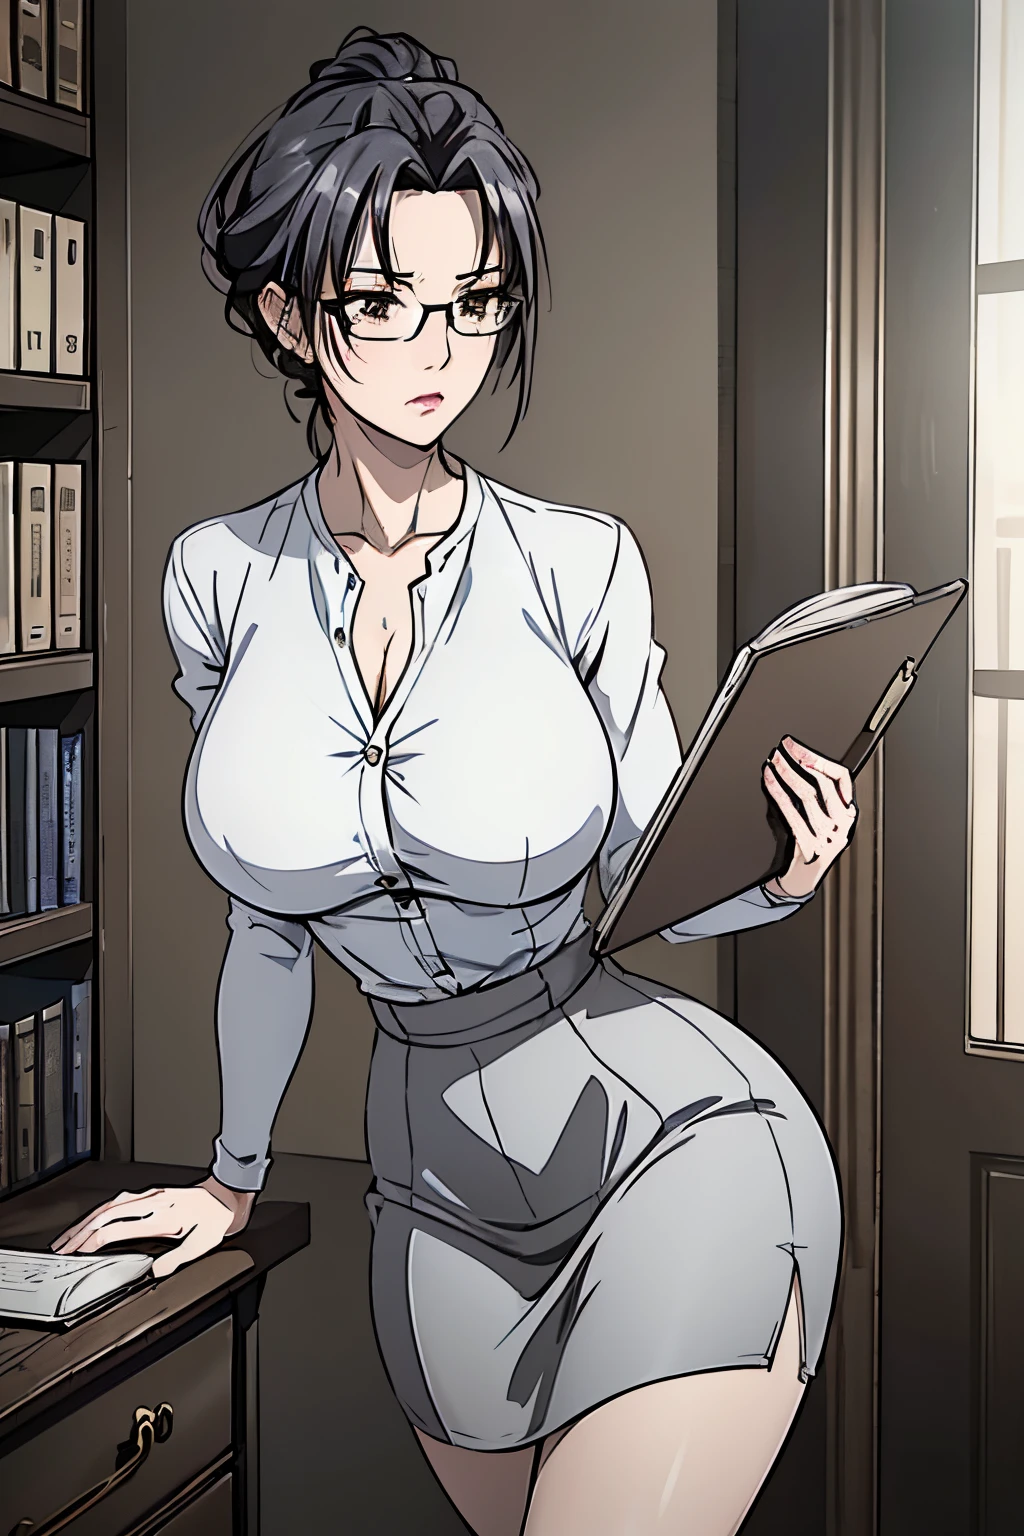 Misako, grey mini rock, white shirt, grey jacket, black stockings, high heels, adult, 35 years old, beautiful women, blue hair, office, glasses, brown eyes, beautiful brown eyes, strict gaze, serious expression,slim body, clipboard in hands, masterpiece, antique office background, bookshelves,